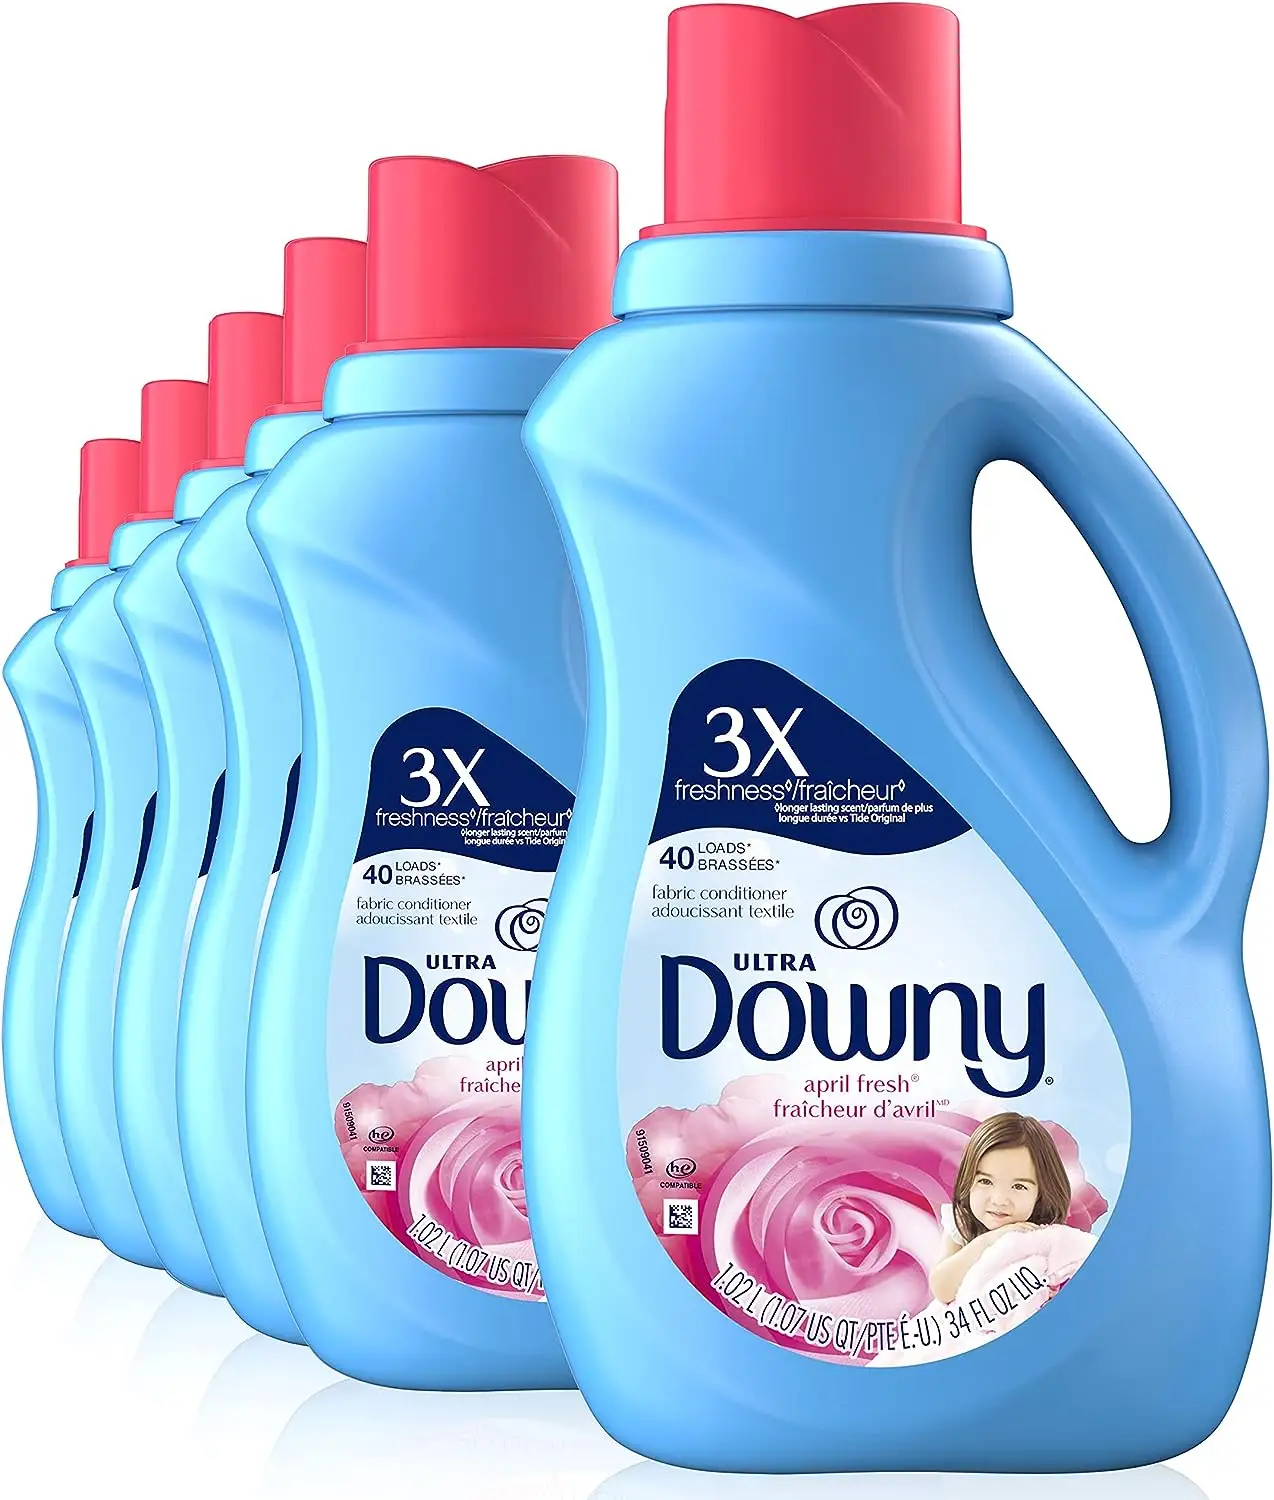 Wholesale Price Downy April Fresh Fabric Softener 1.89ltr Price for sale